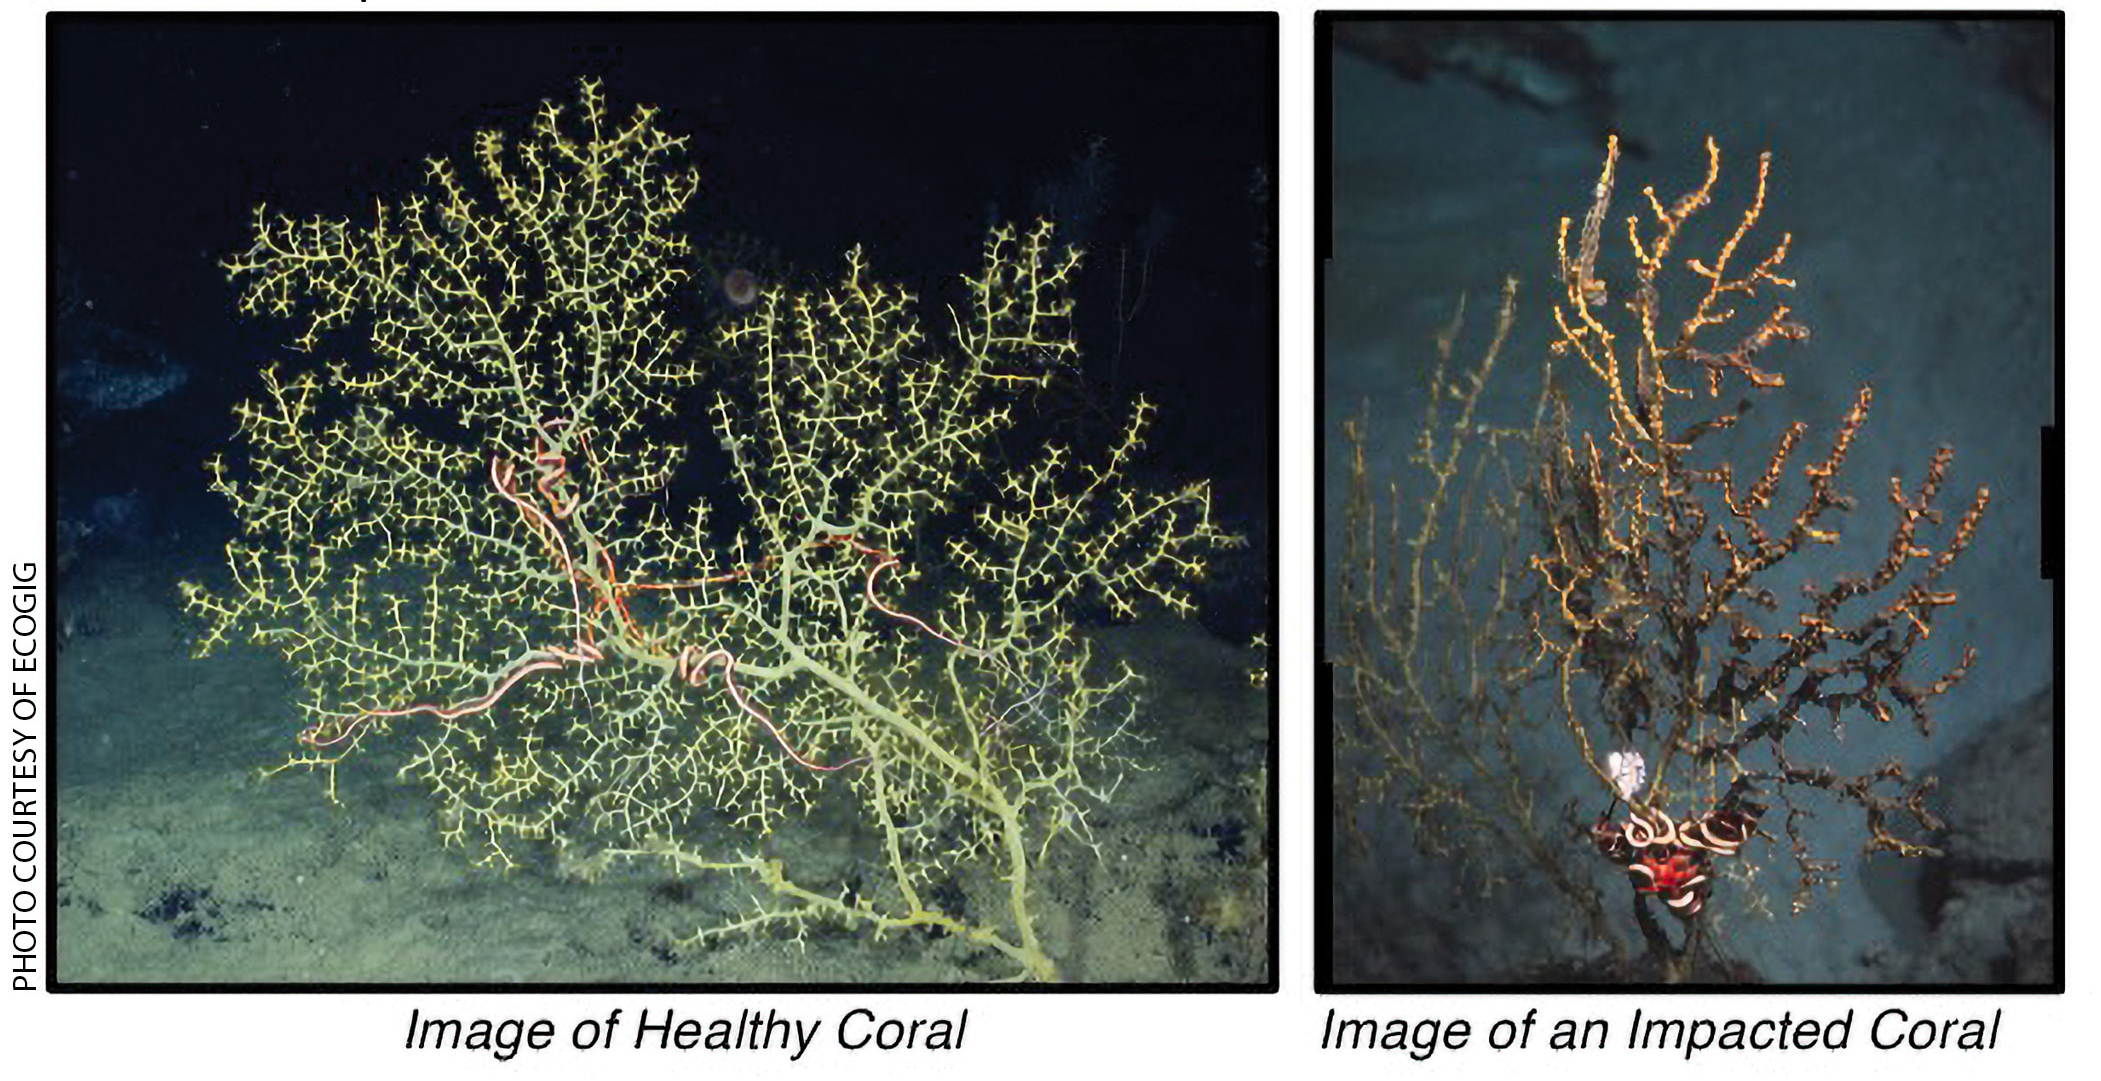 Images of healthy and unhealthy coral from 2010, right after the Deepwater Horizon oil spill. 